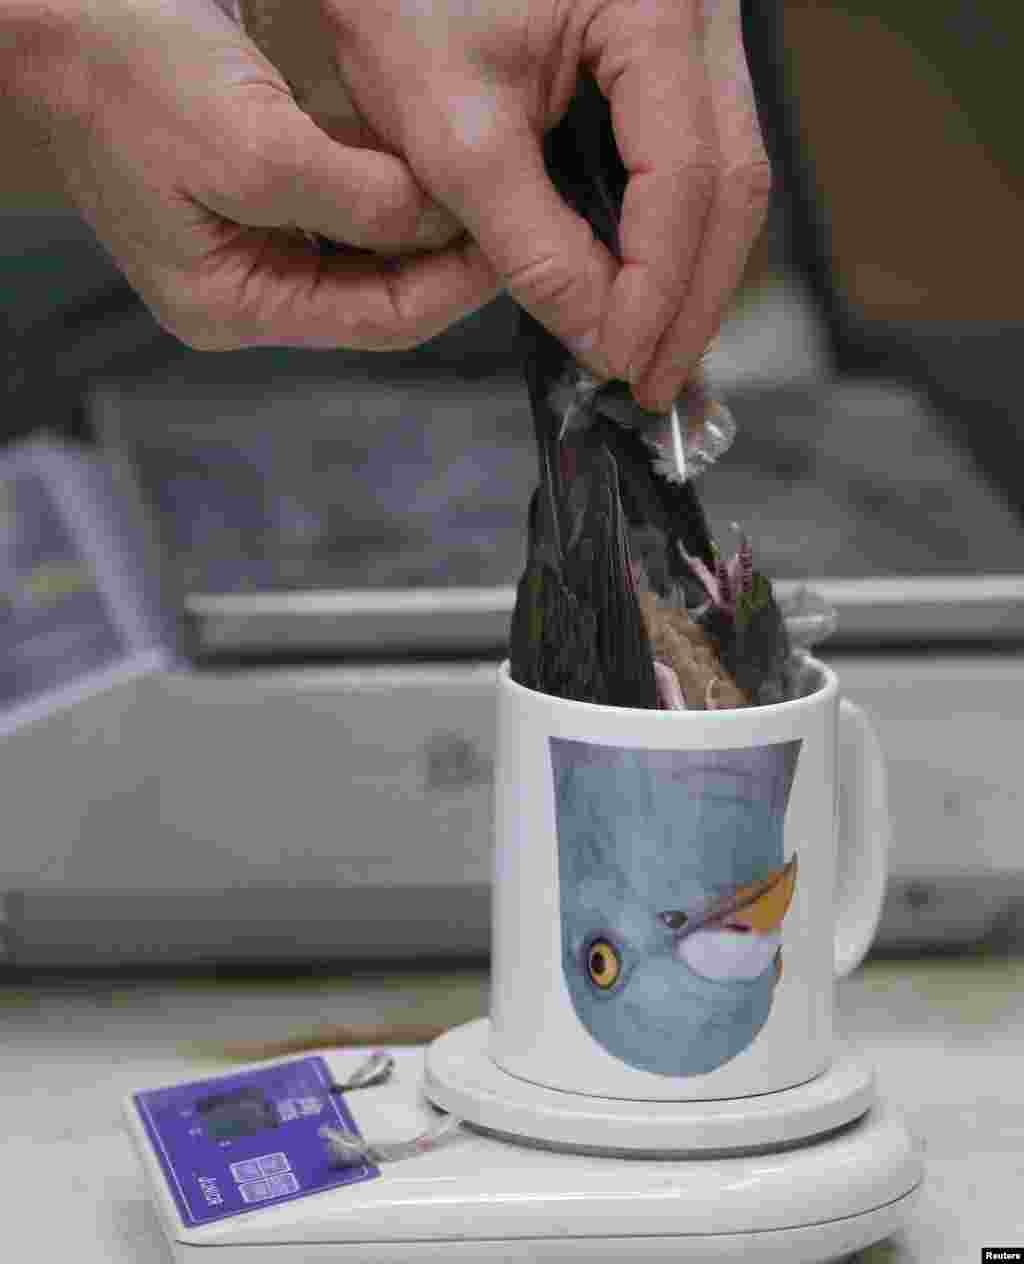 An Emerald Dove is placed in a mug to be weighed during the annual bird health check at Chester Zoo in Chester northern England.